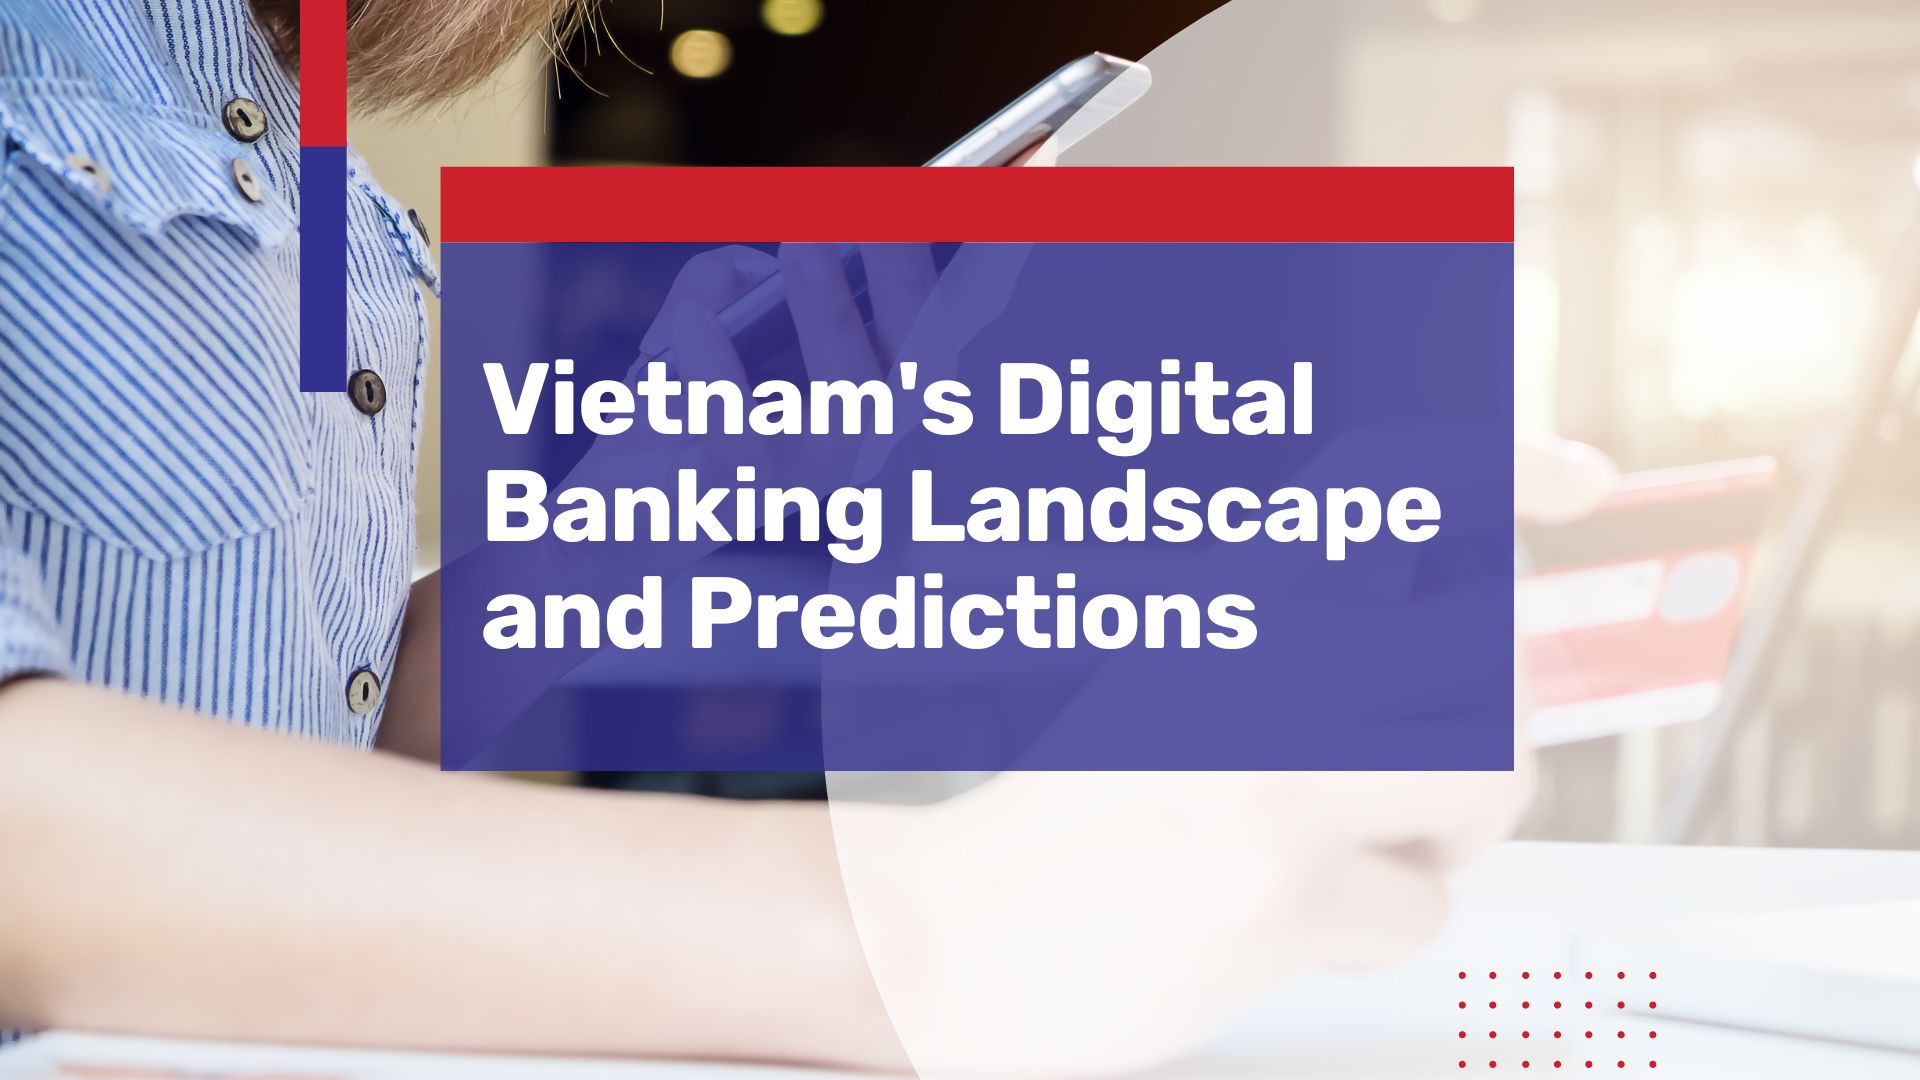 Recent trends in Vietnam’s digital banking landscape and what the future holds